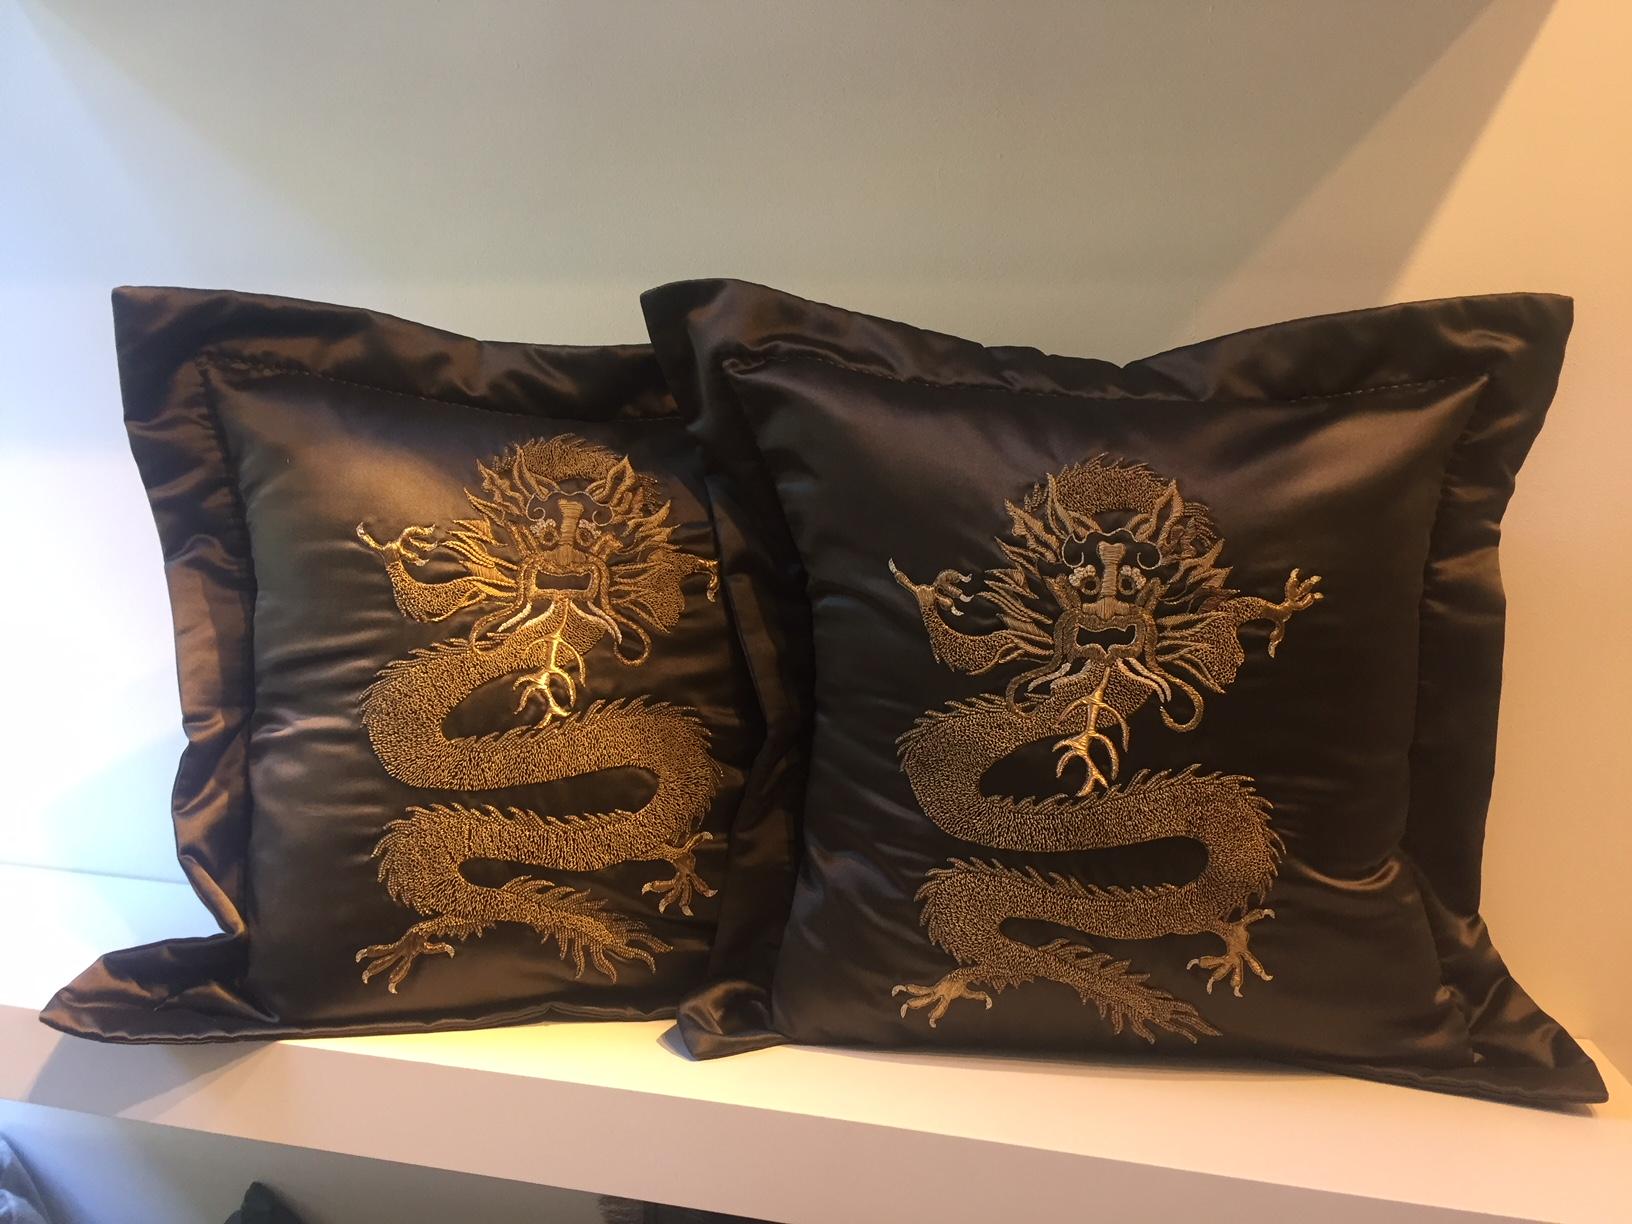 Cushion silk satin col. brown with dragon design hand embroidery with gold thread in different shades, the cushion cover has as finish a border 